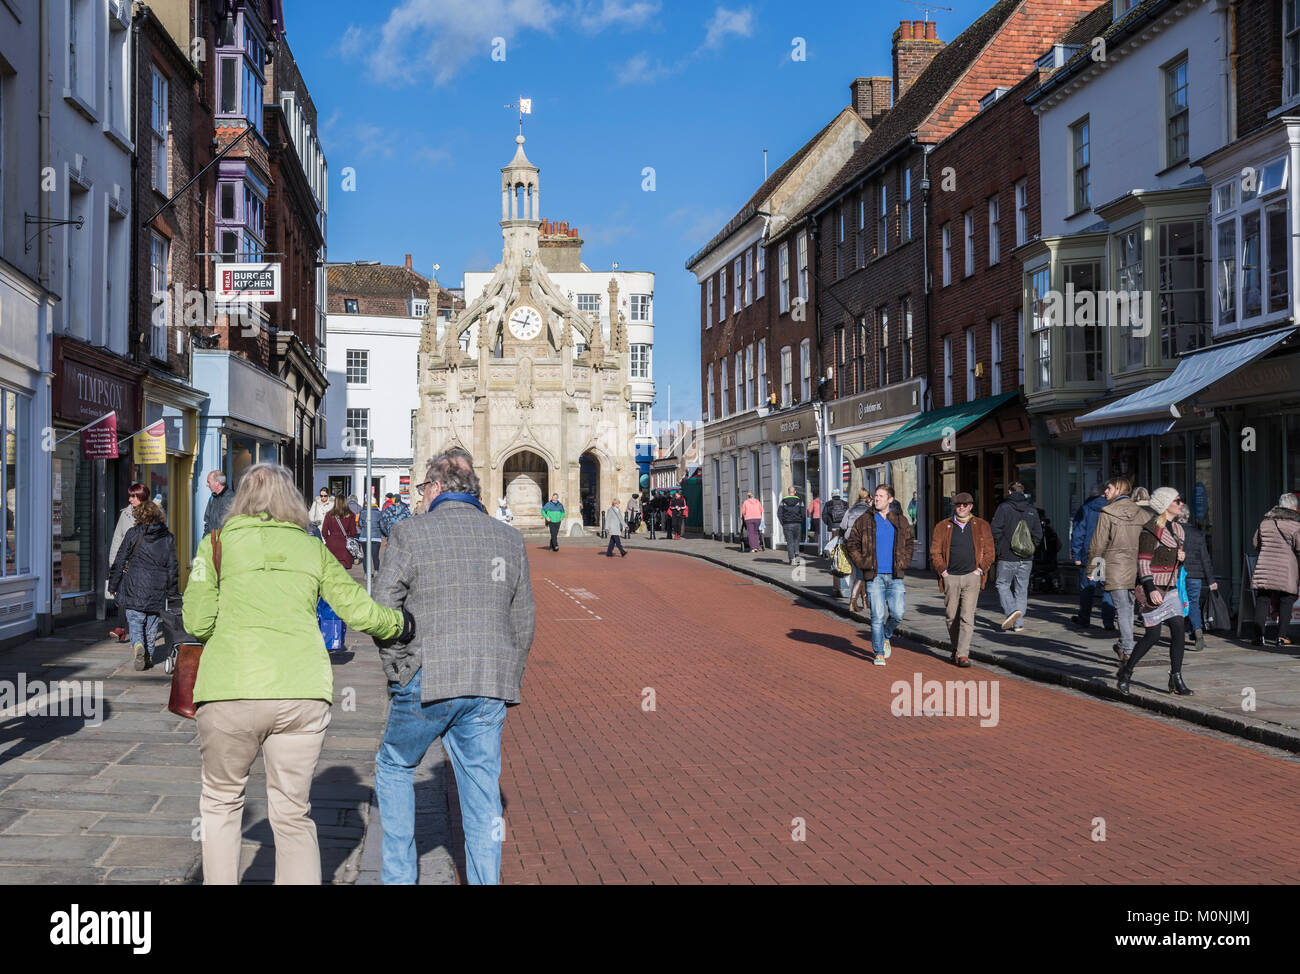 Pedestrianised zone near Chichester Cross (Market Cross) in South Street, City of Chichester, West Sussex, England, UK. Stock Photo